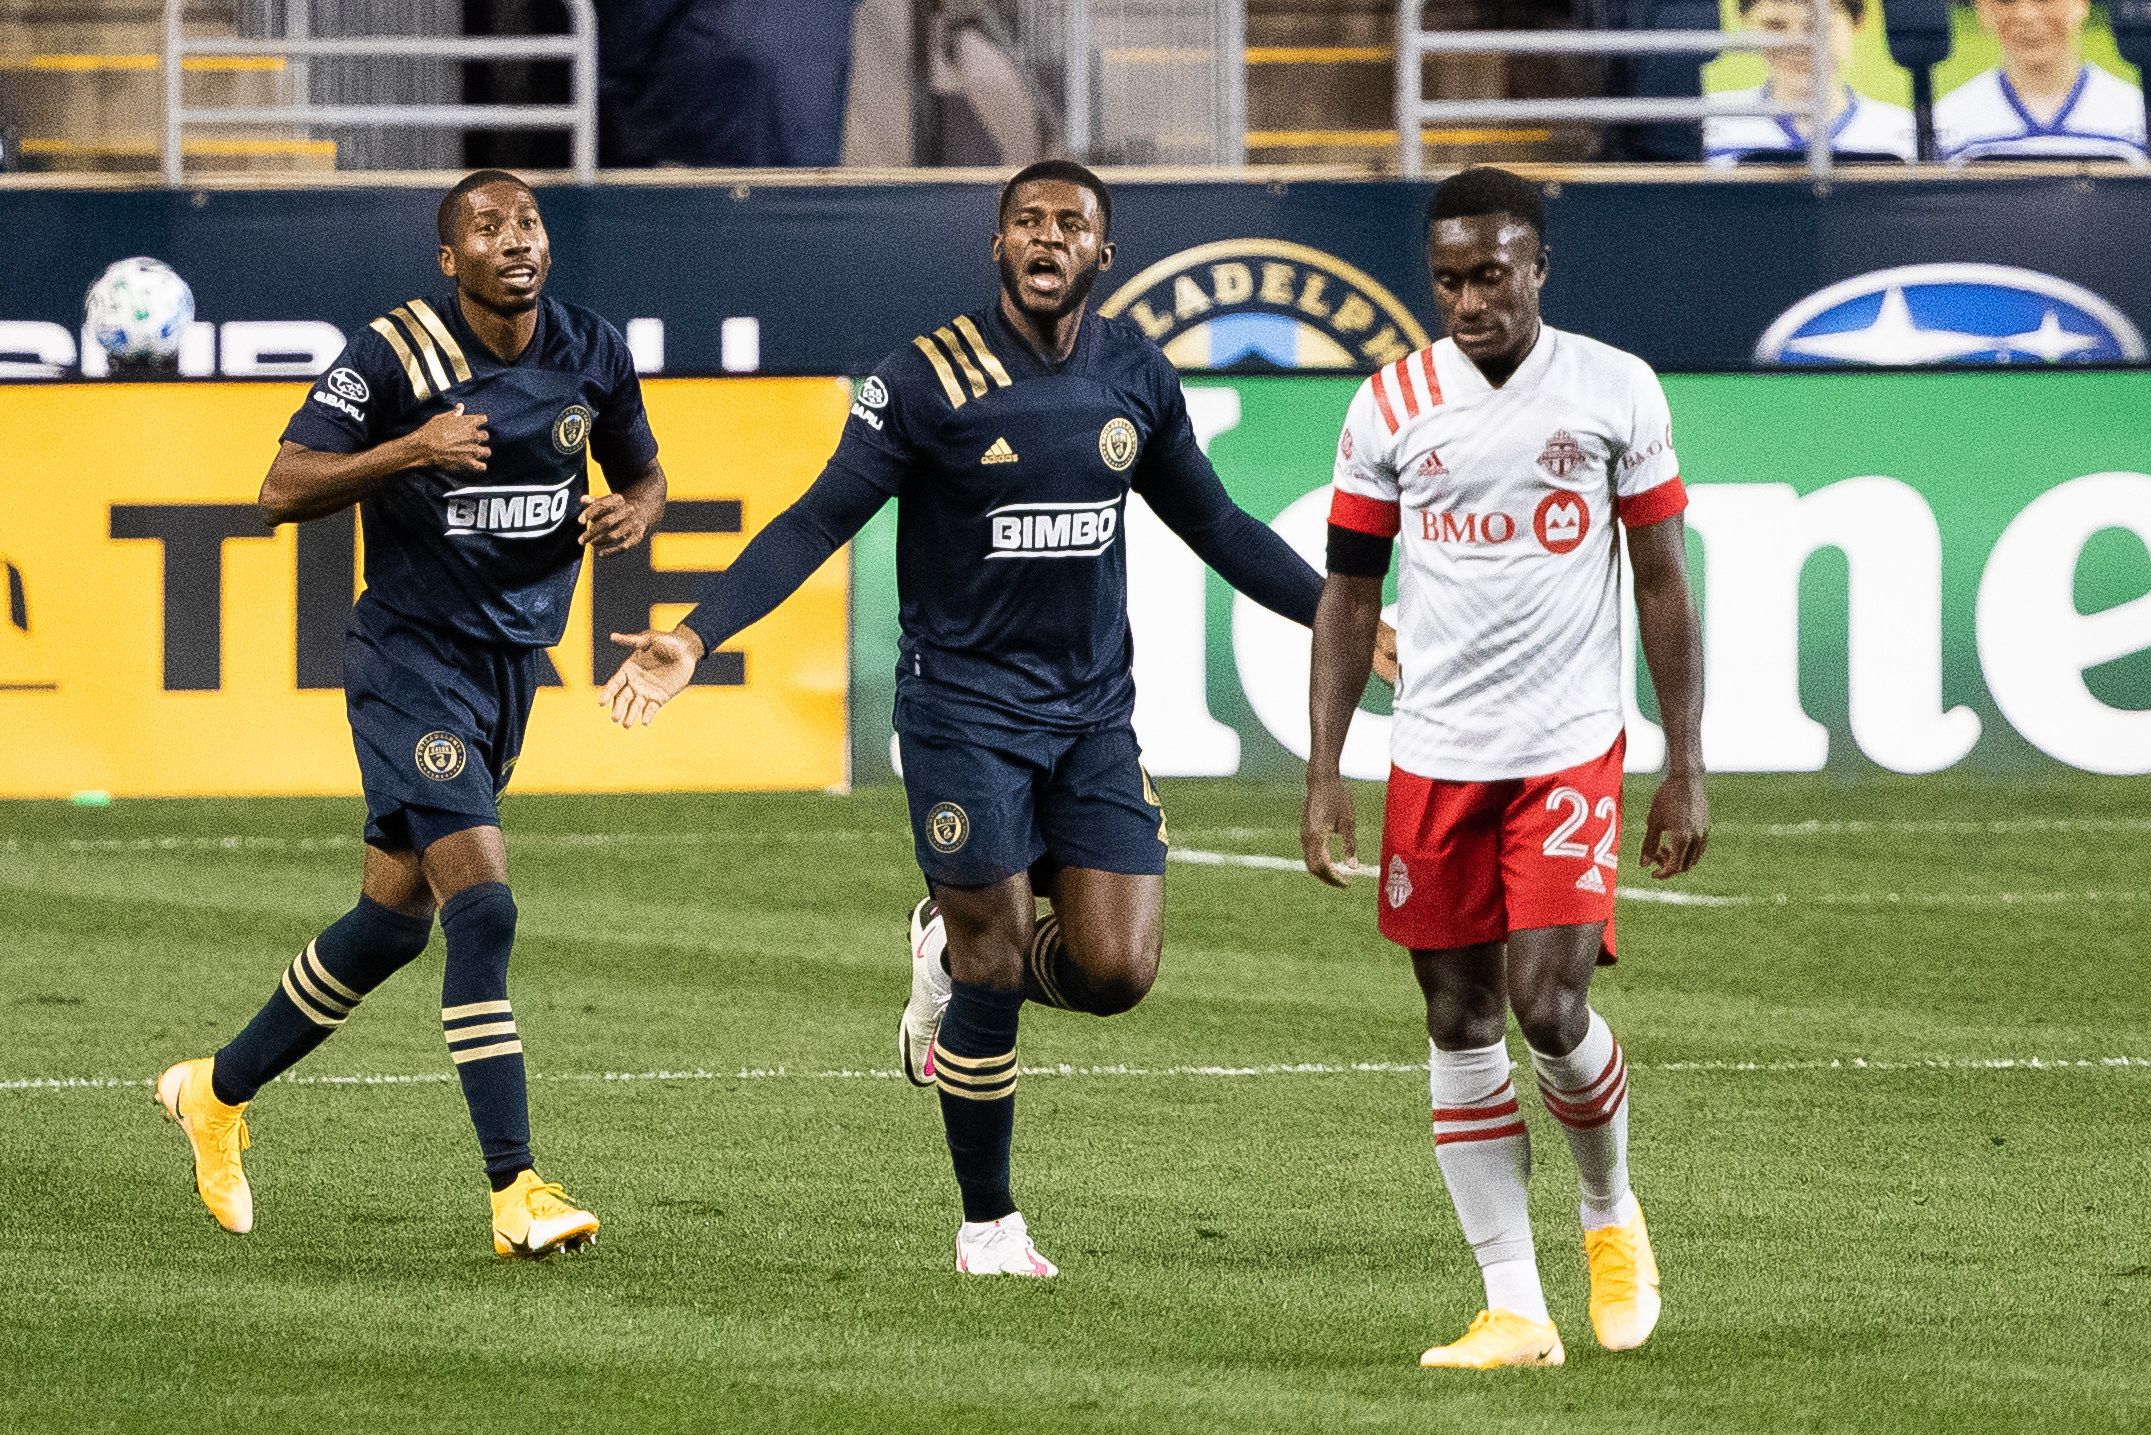 Oct 24, 2020; Philadelphia, Pennsylvania, USA; Philadelphia Union defender Mark McKenzie (4) reacts in front of defender Ray Gaddis (28) and midfielder Richie Laryea (22) after scoring during the first half at Subaru Park. Mandatory Credit: Bill Streicher-USA TODAY Sports